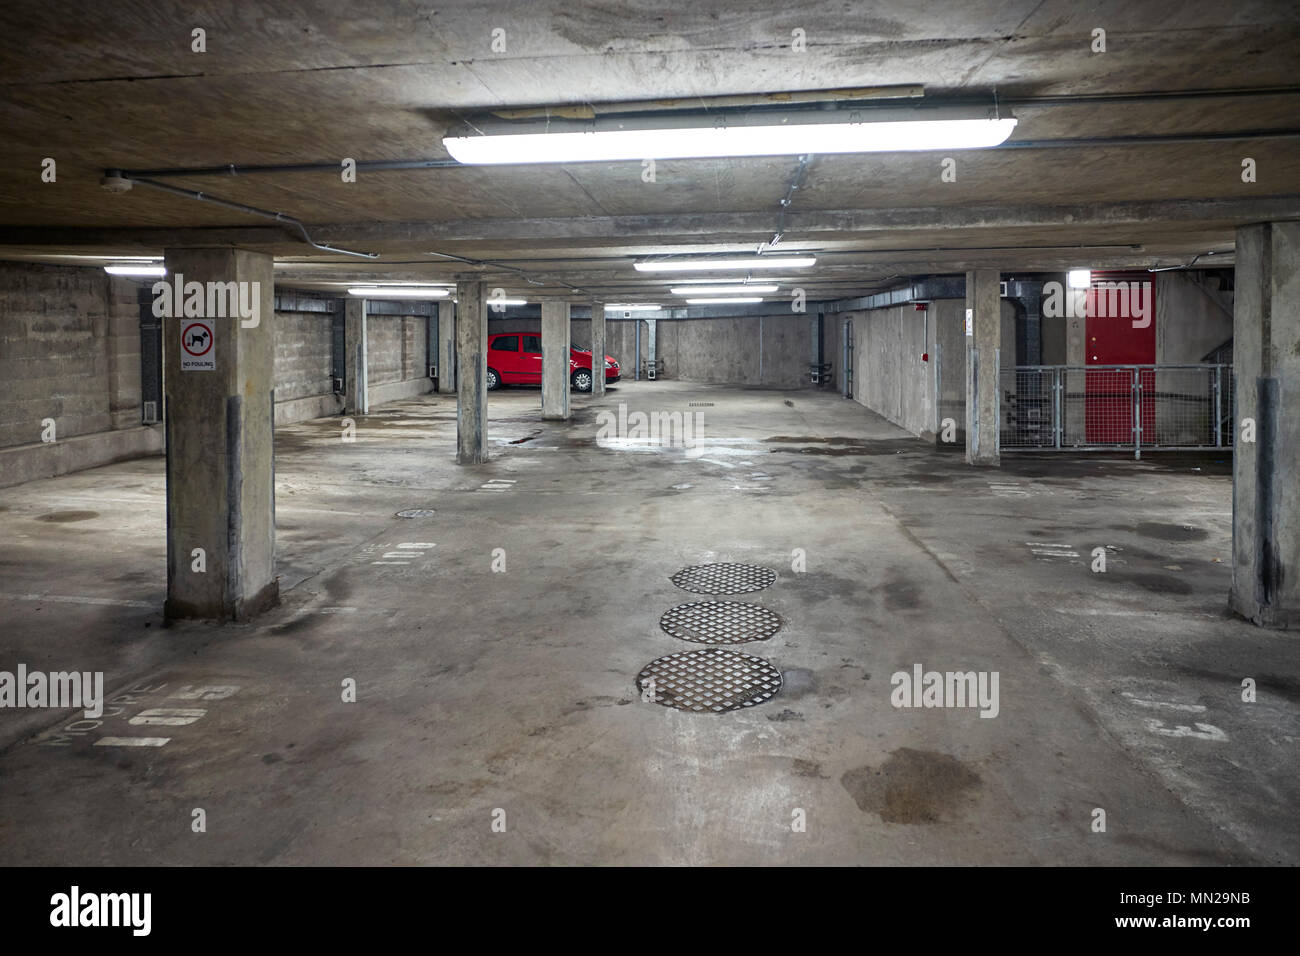 Inside an underground car park at night with only one red car parked Stock Photo